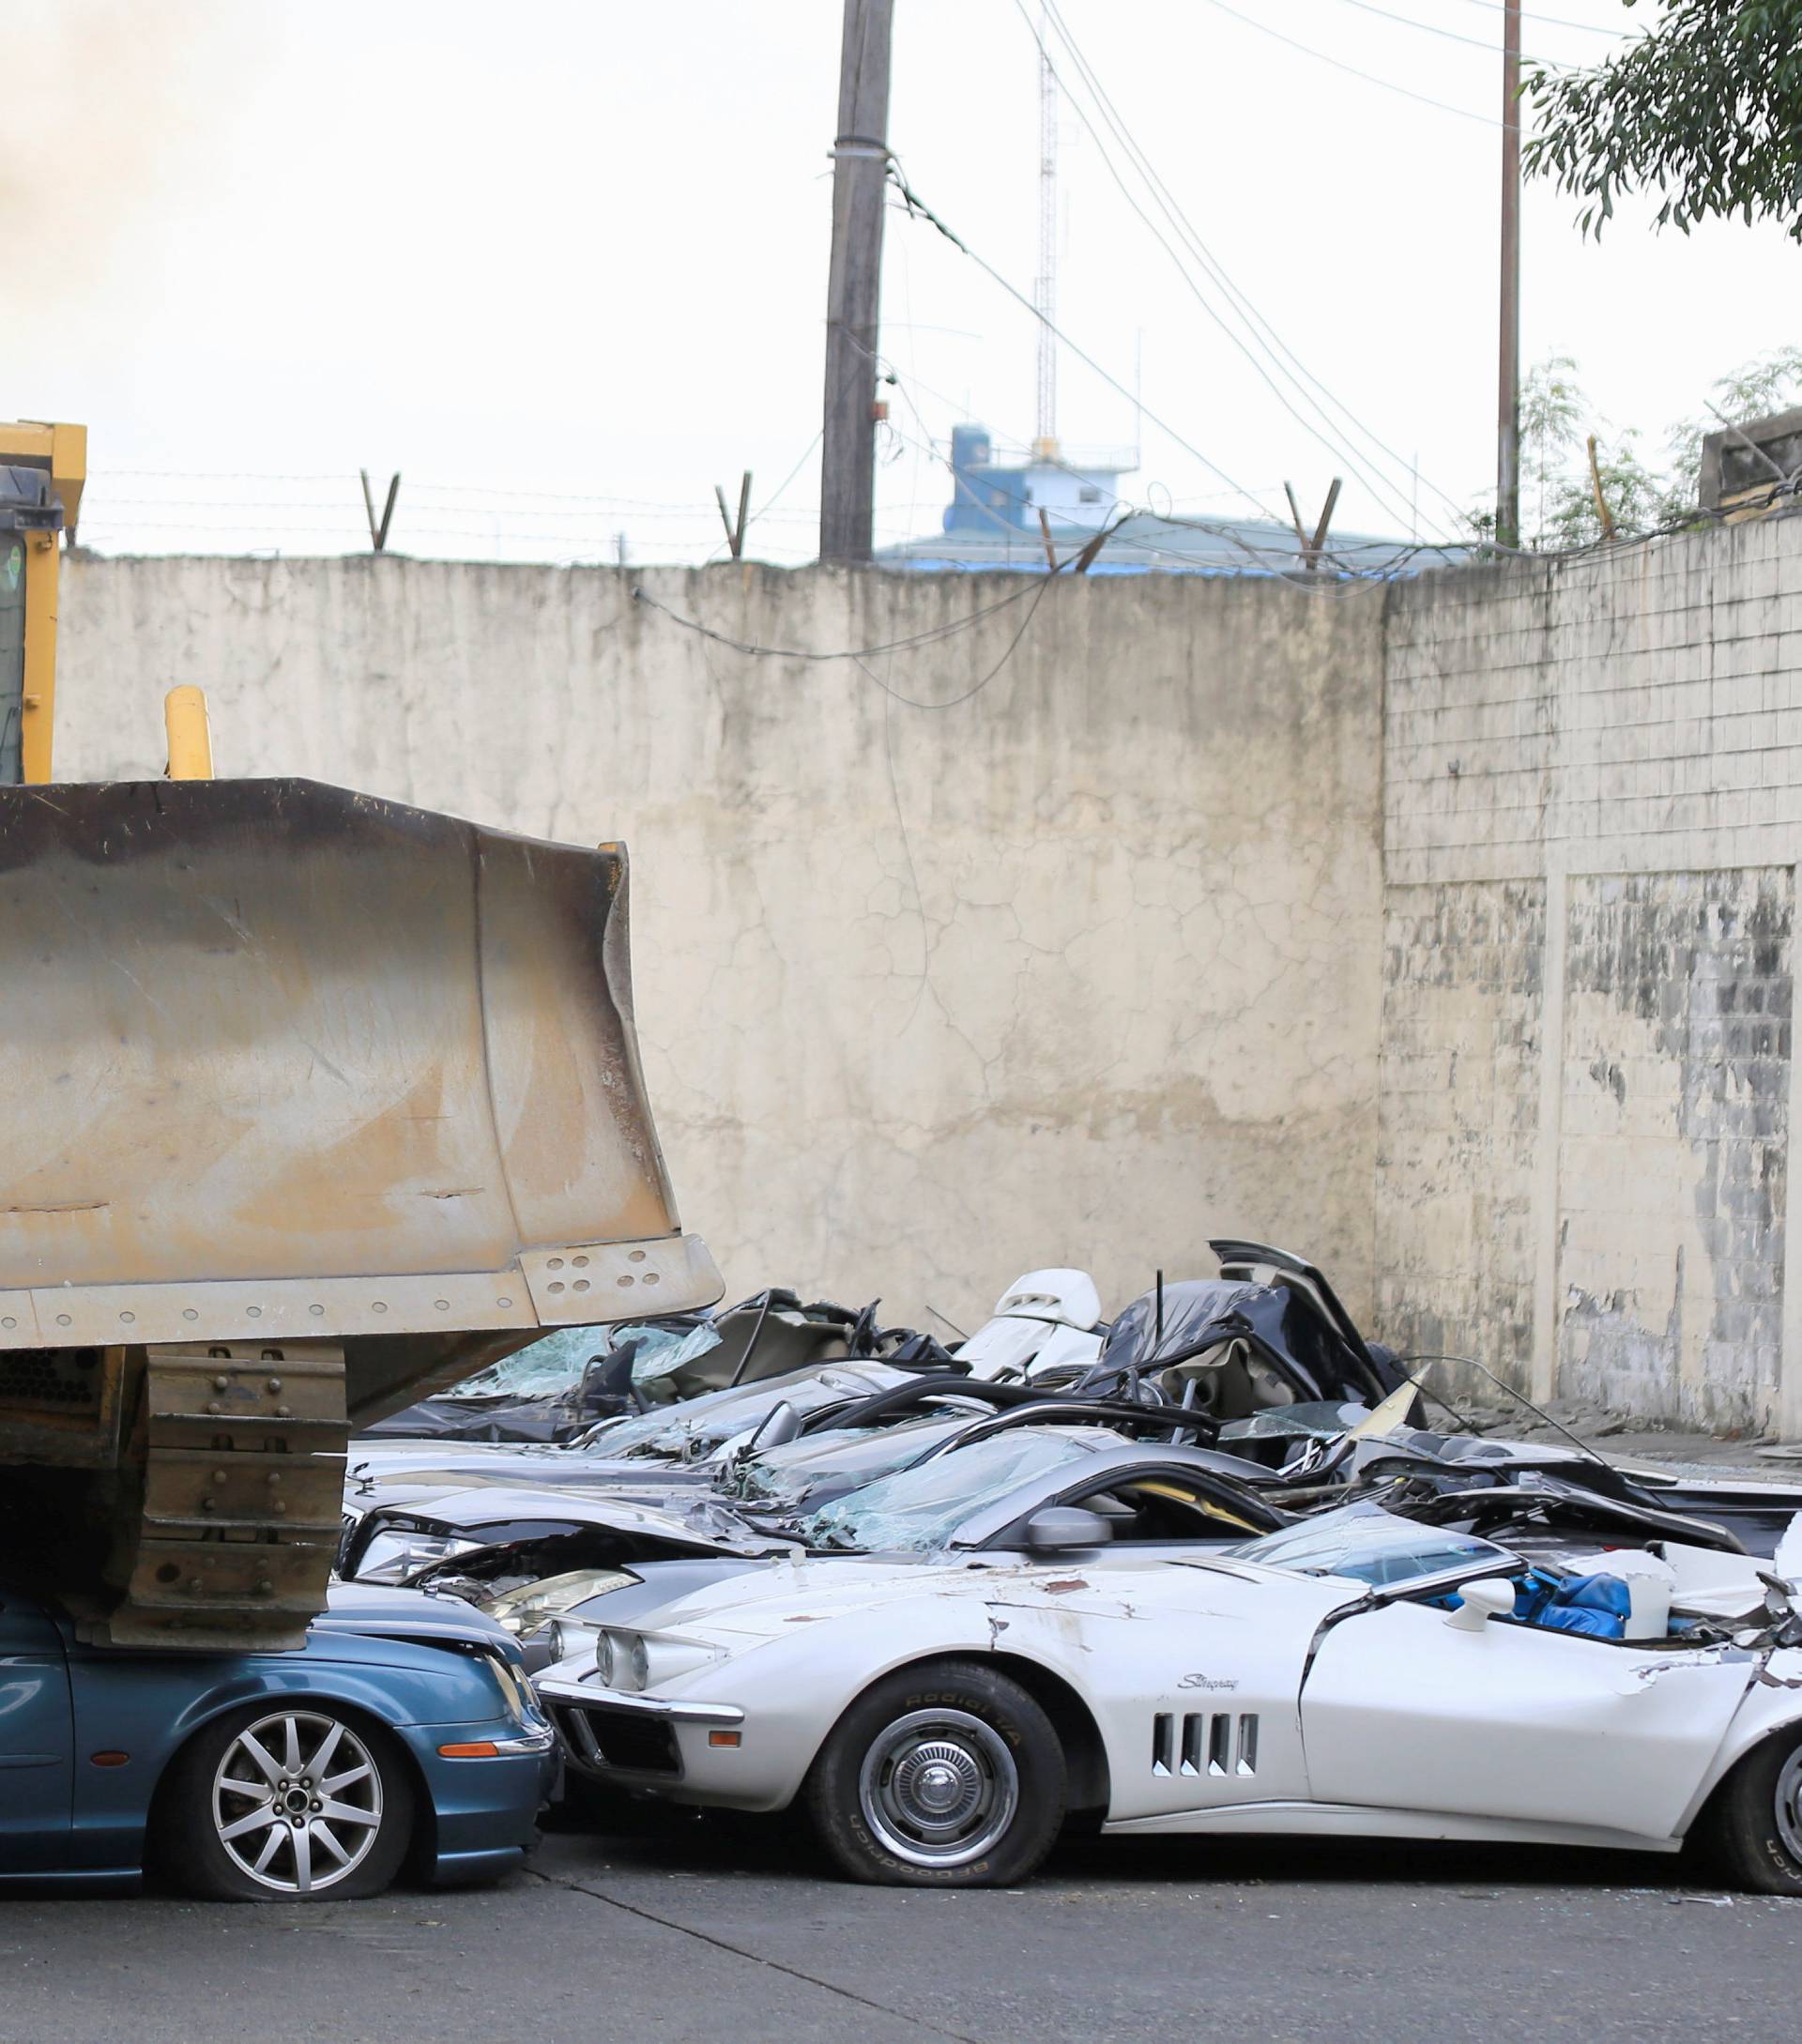 A bulldozer destroys condemned smuggled luxury cars worth 61,626,000.00 pesos during the 116th Bureau of Customs founding anniversary in Manila